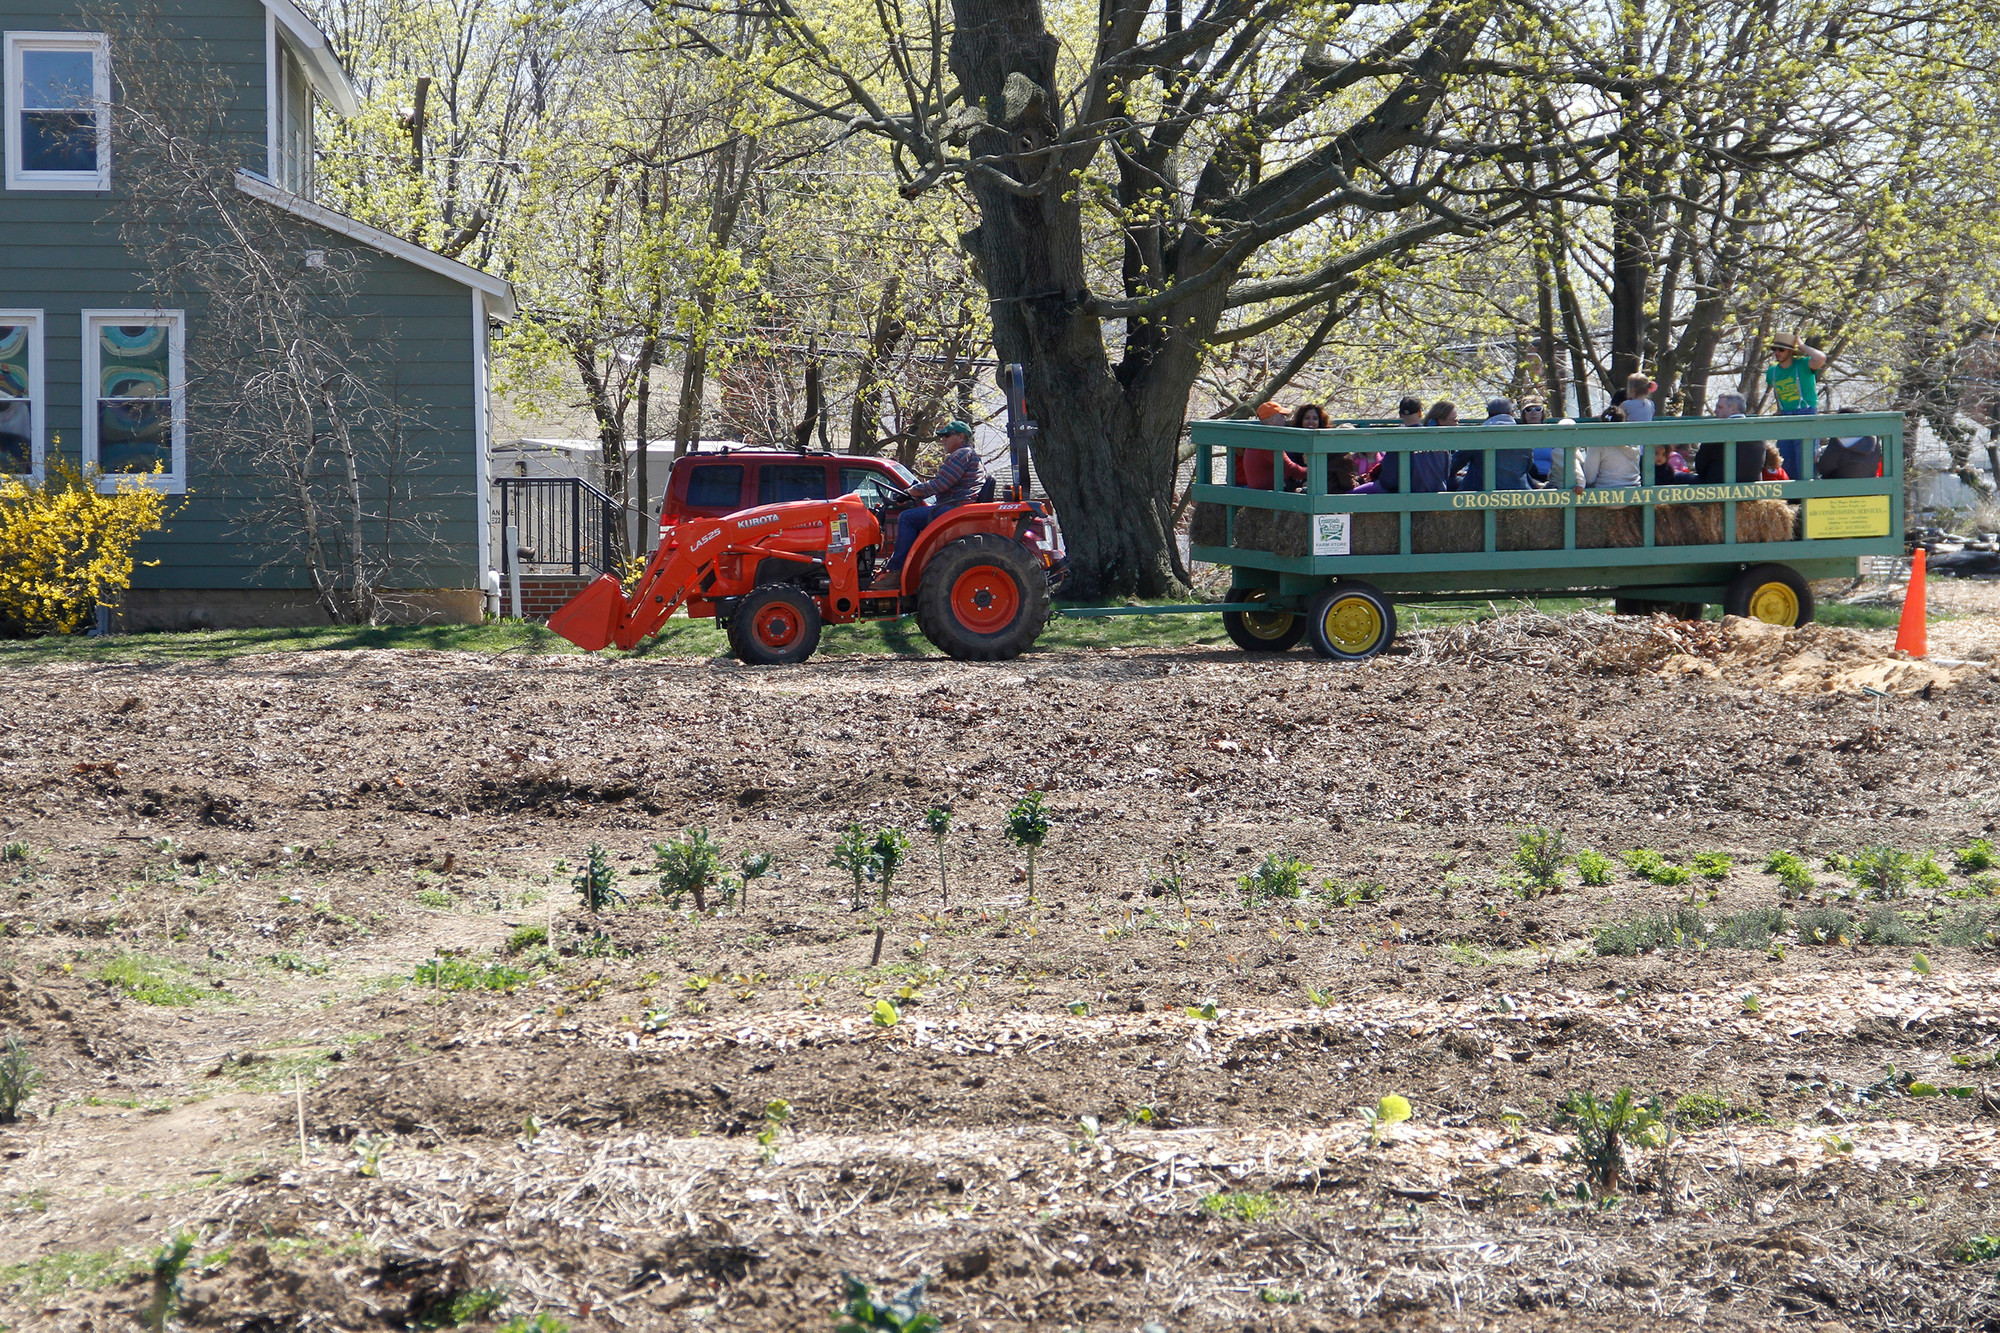 A tractor gives hayrides near the farm’s many kale plants.